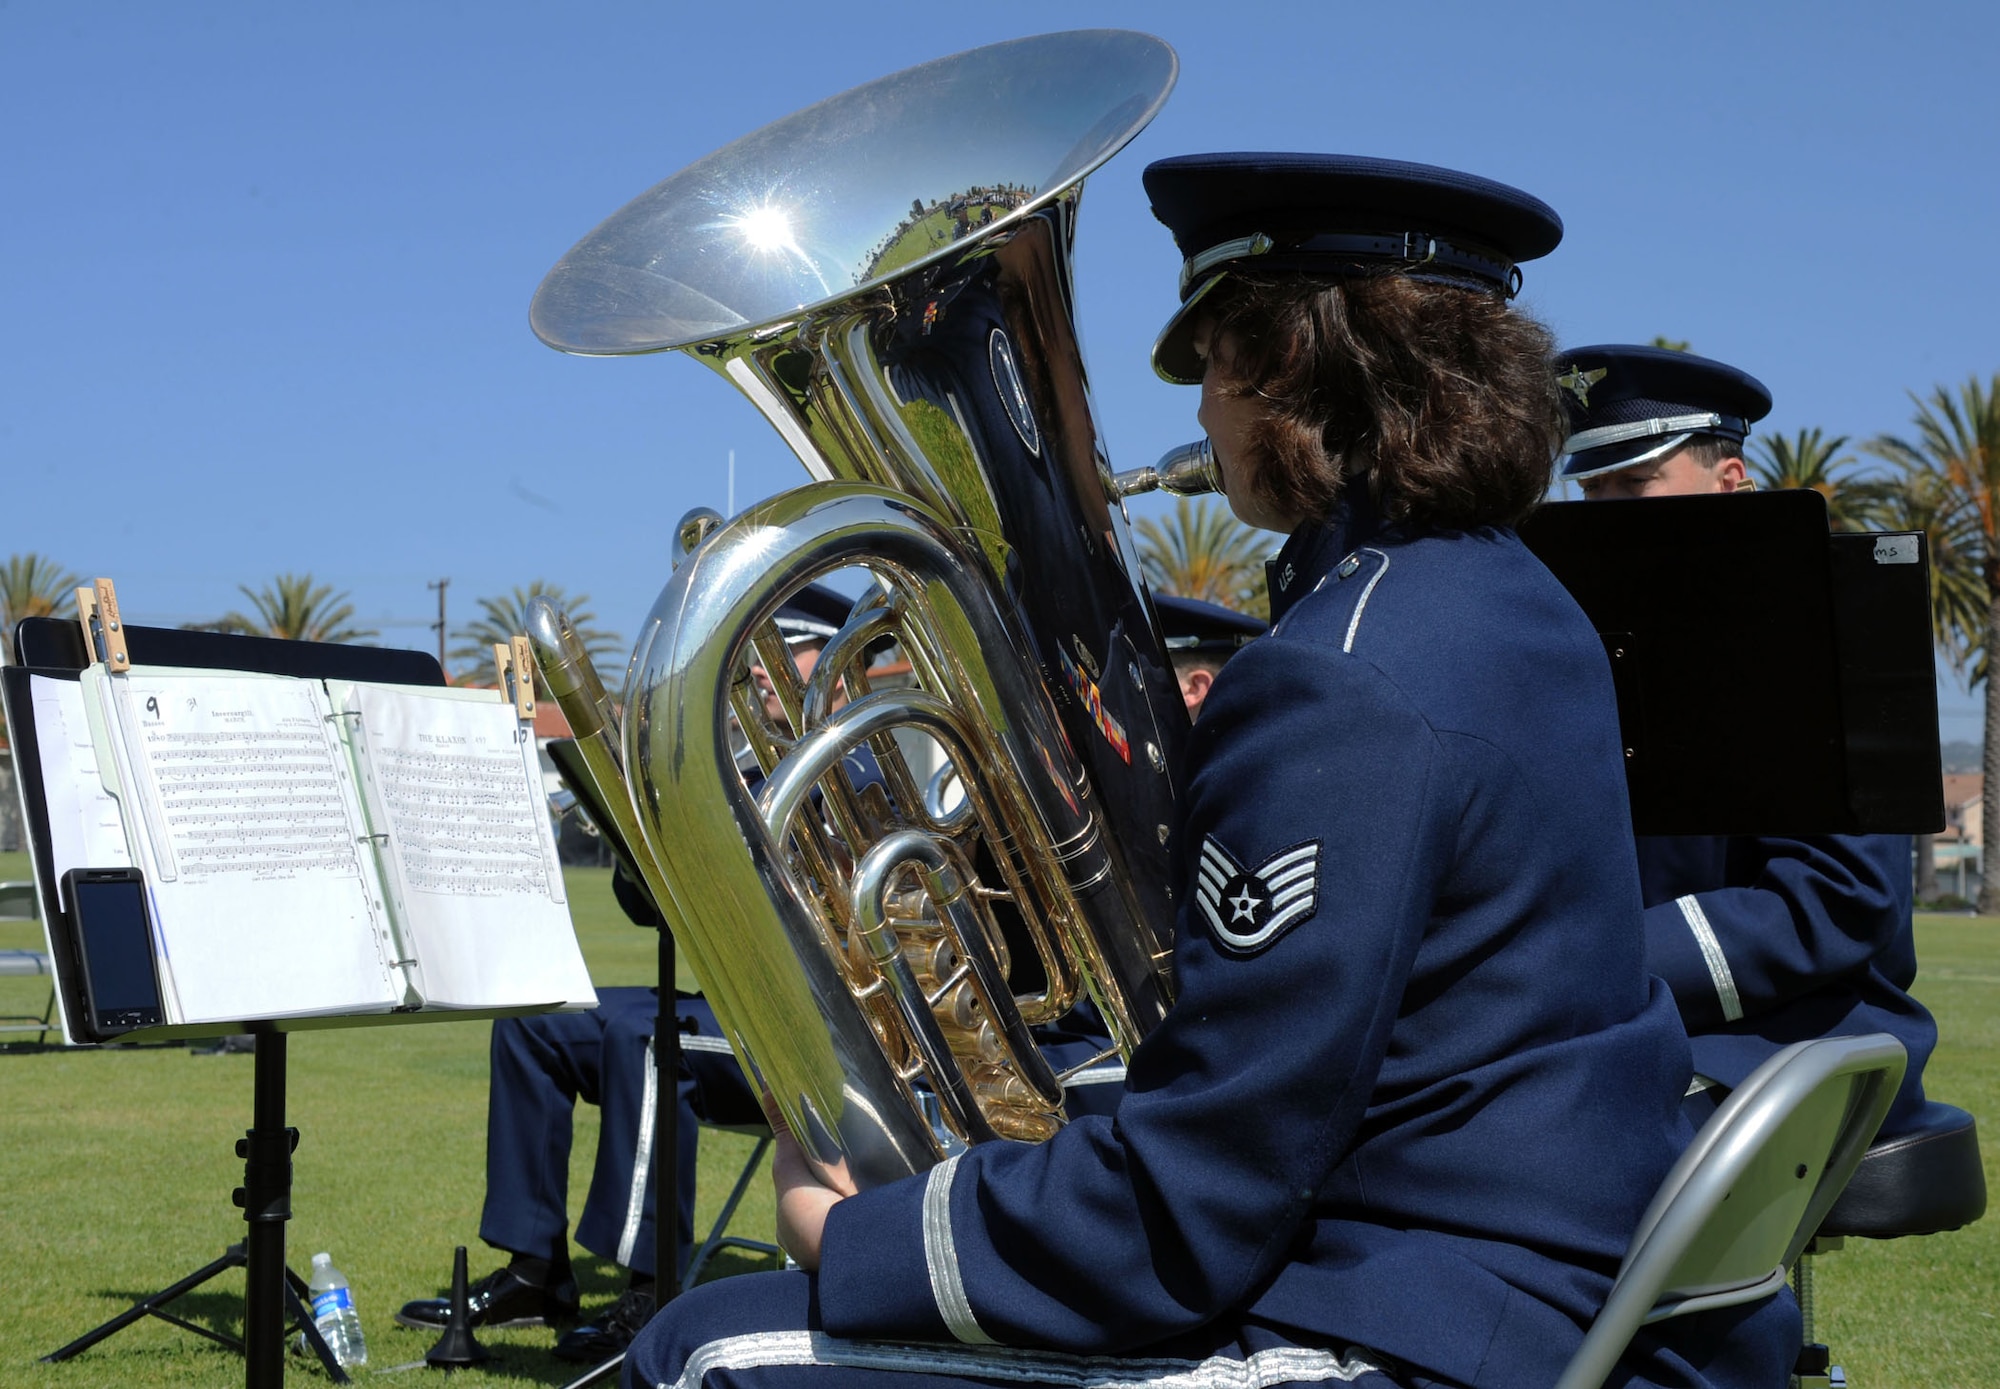 Musicians from the Band of the Golden West, play ceremonial music during the SMC change of command ceremony, June 3. Lieutenant Gen. Ellen Pawlikowski assumed command from Lt. Gen. Tom Sheridan at the ceremony. (Photo by Sarah Corrice)